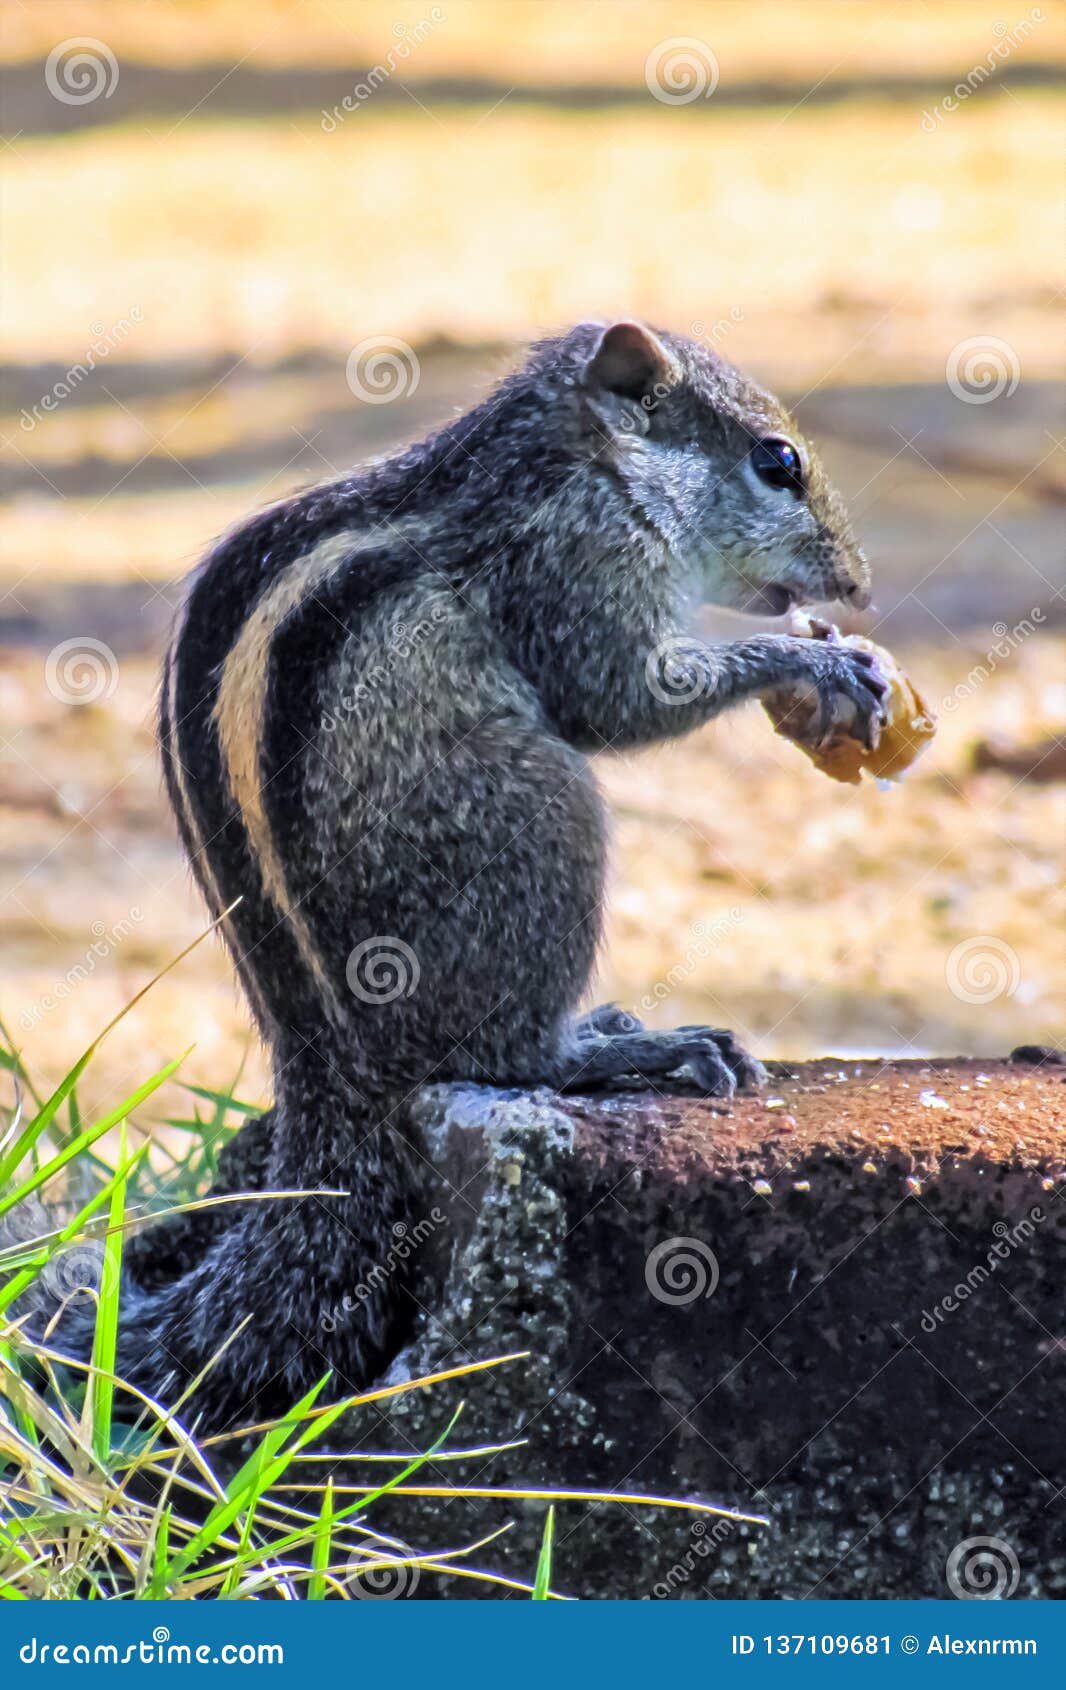 Chipmunk Eating Bread Sitting On A Stone Stock Image Image Of